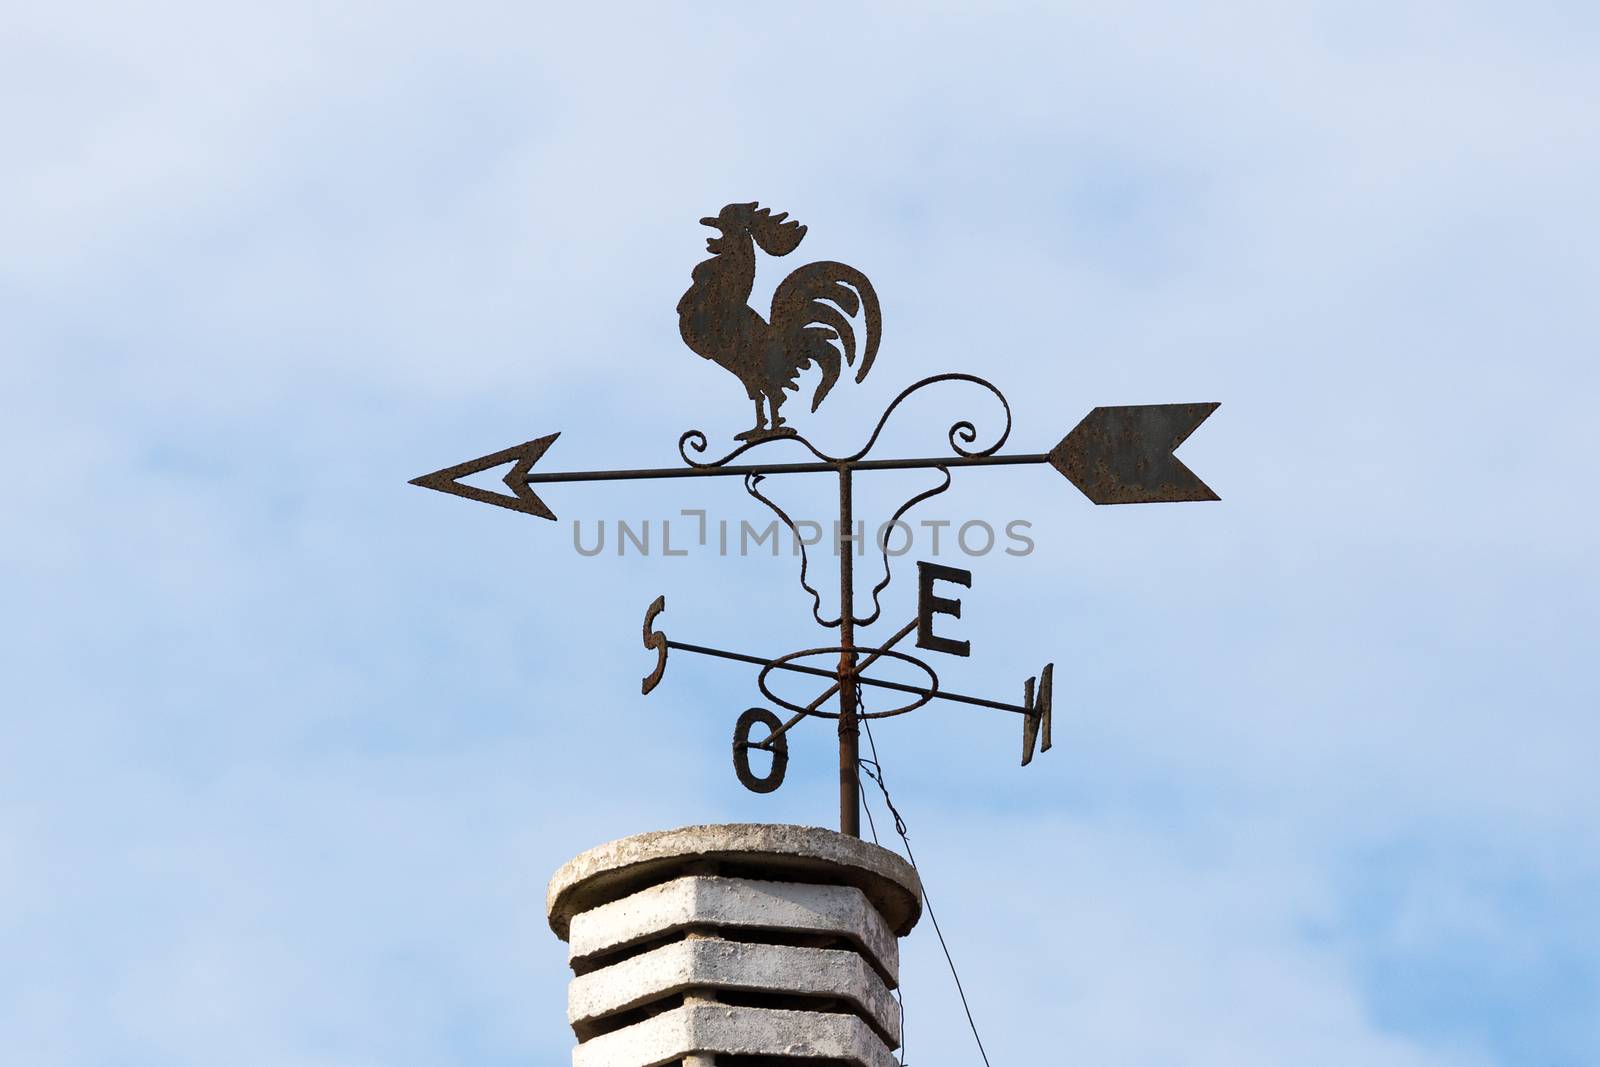 Weathercock on the chimney